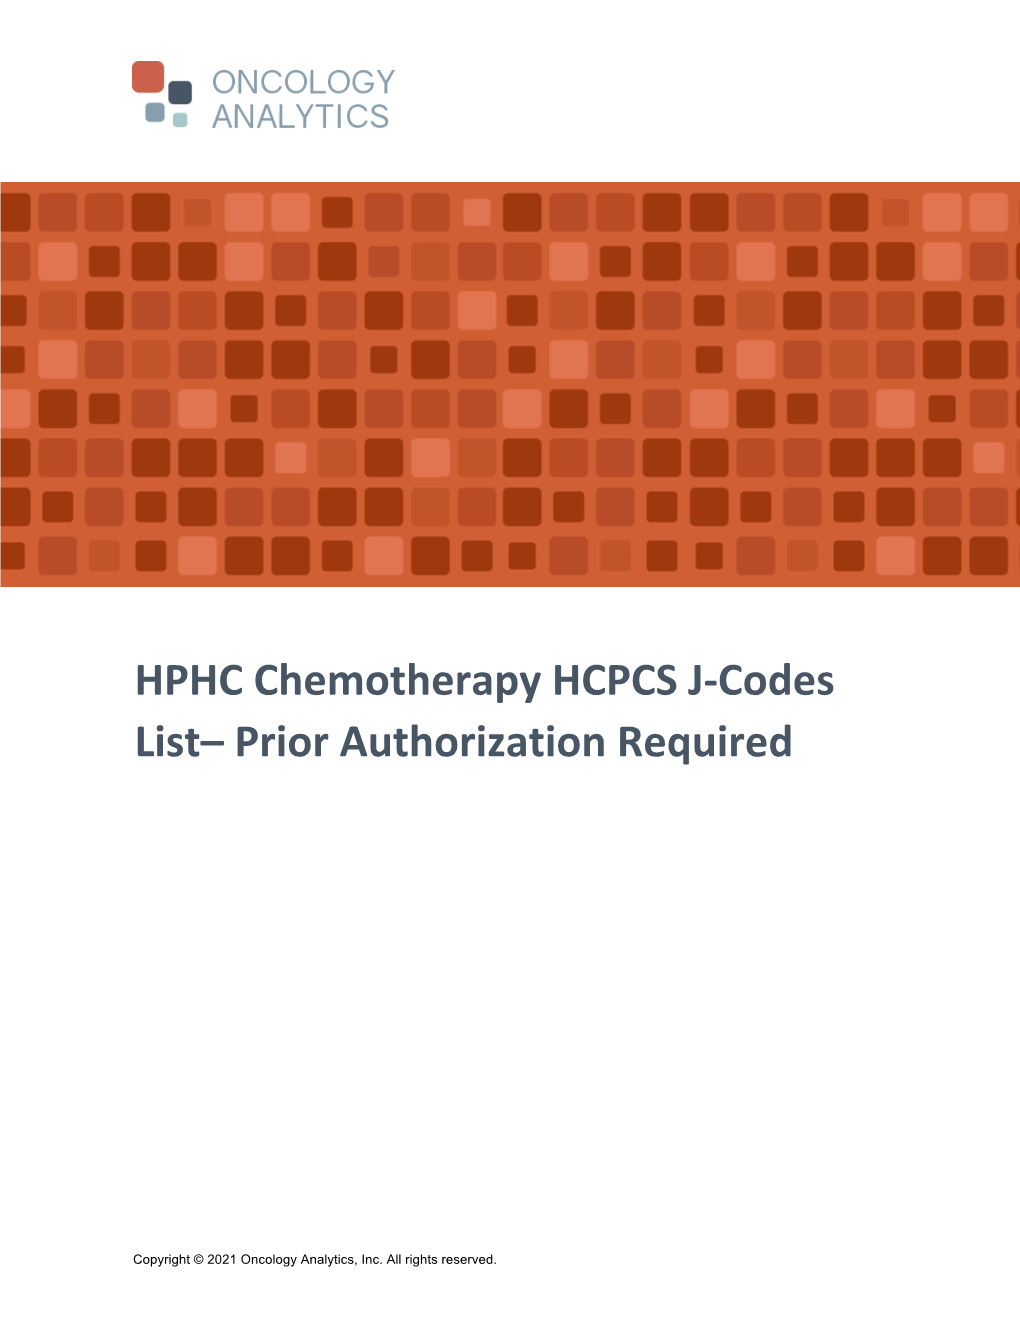 HPHC Chemotherapy Required Prior Auth List.4.13.21